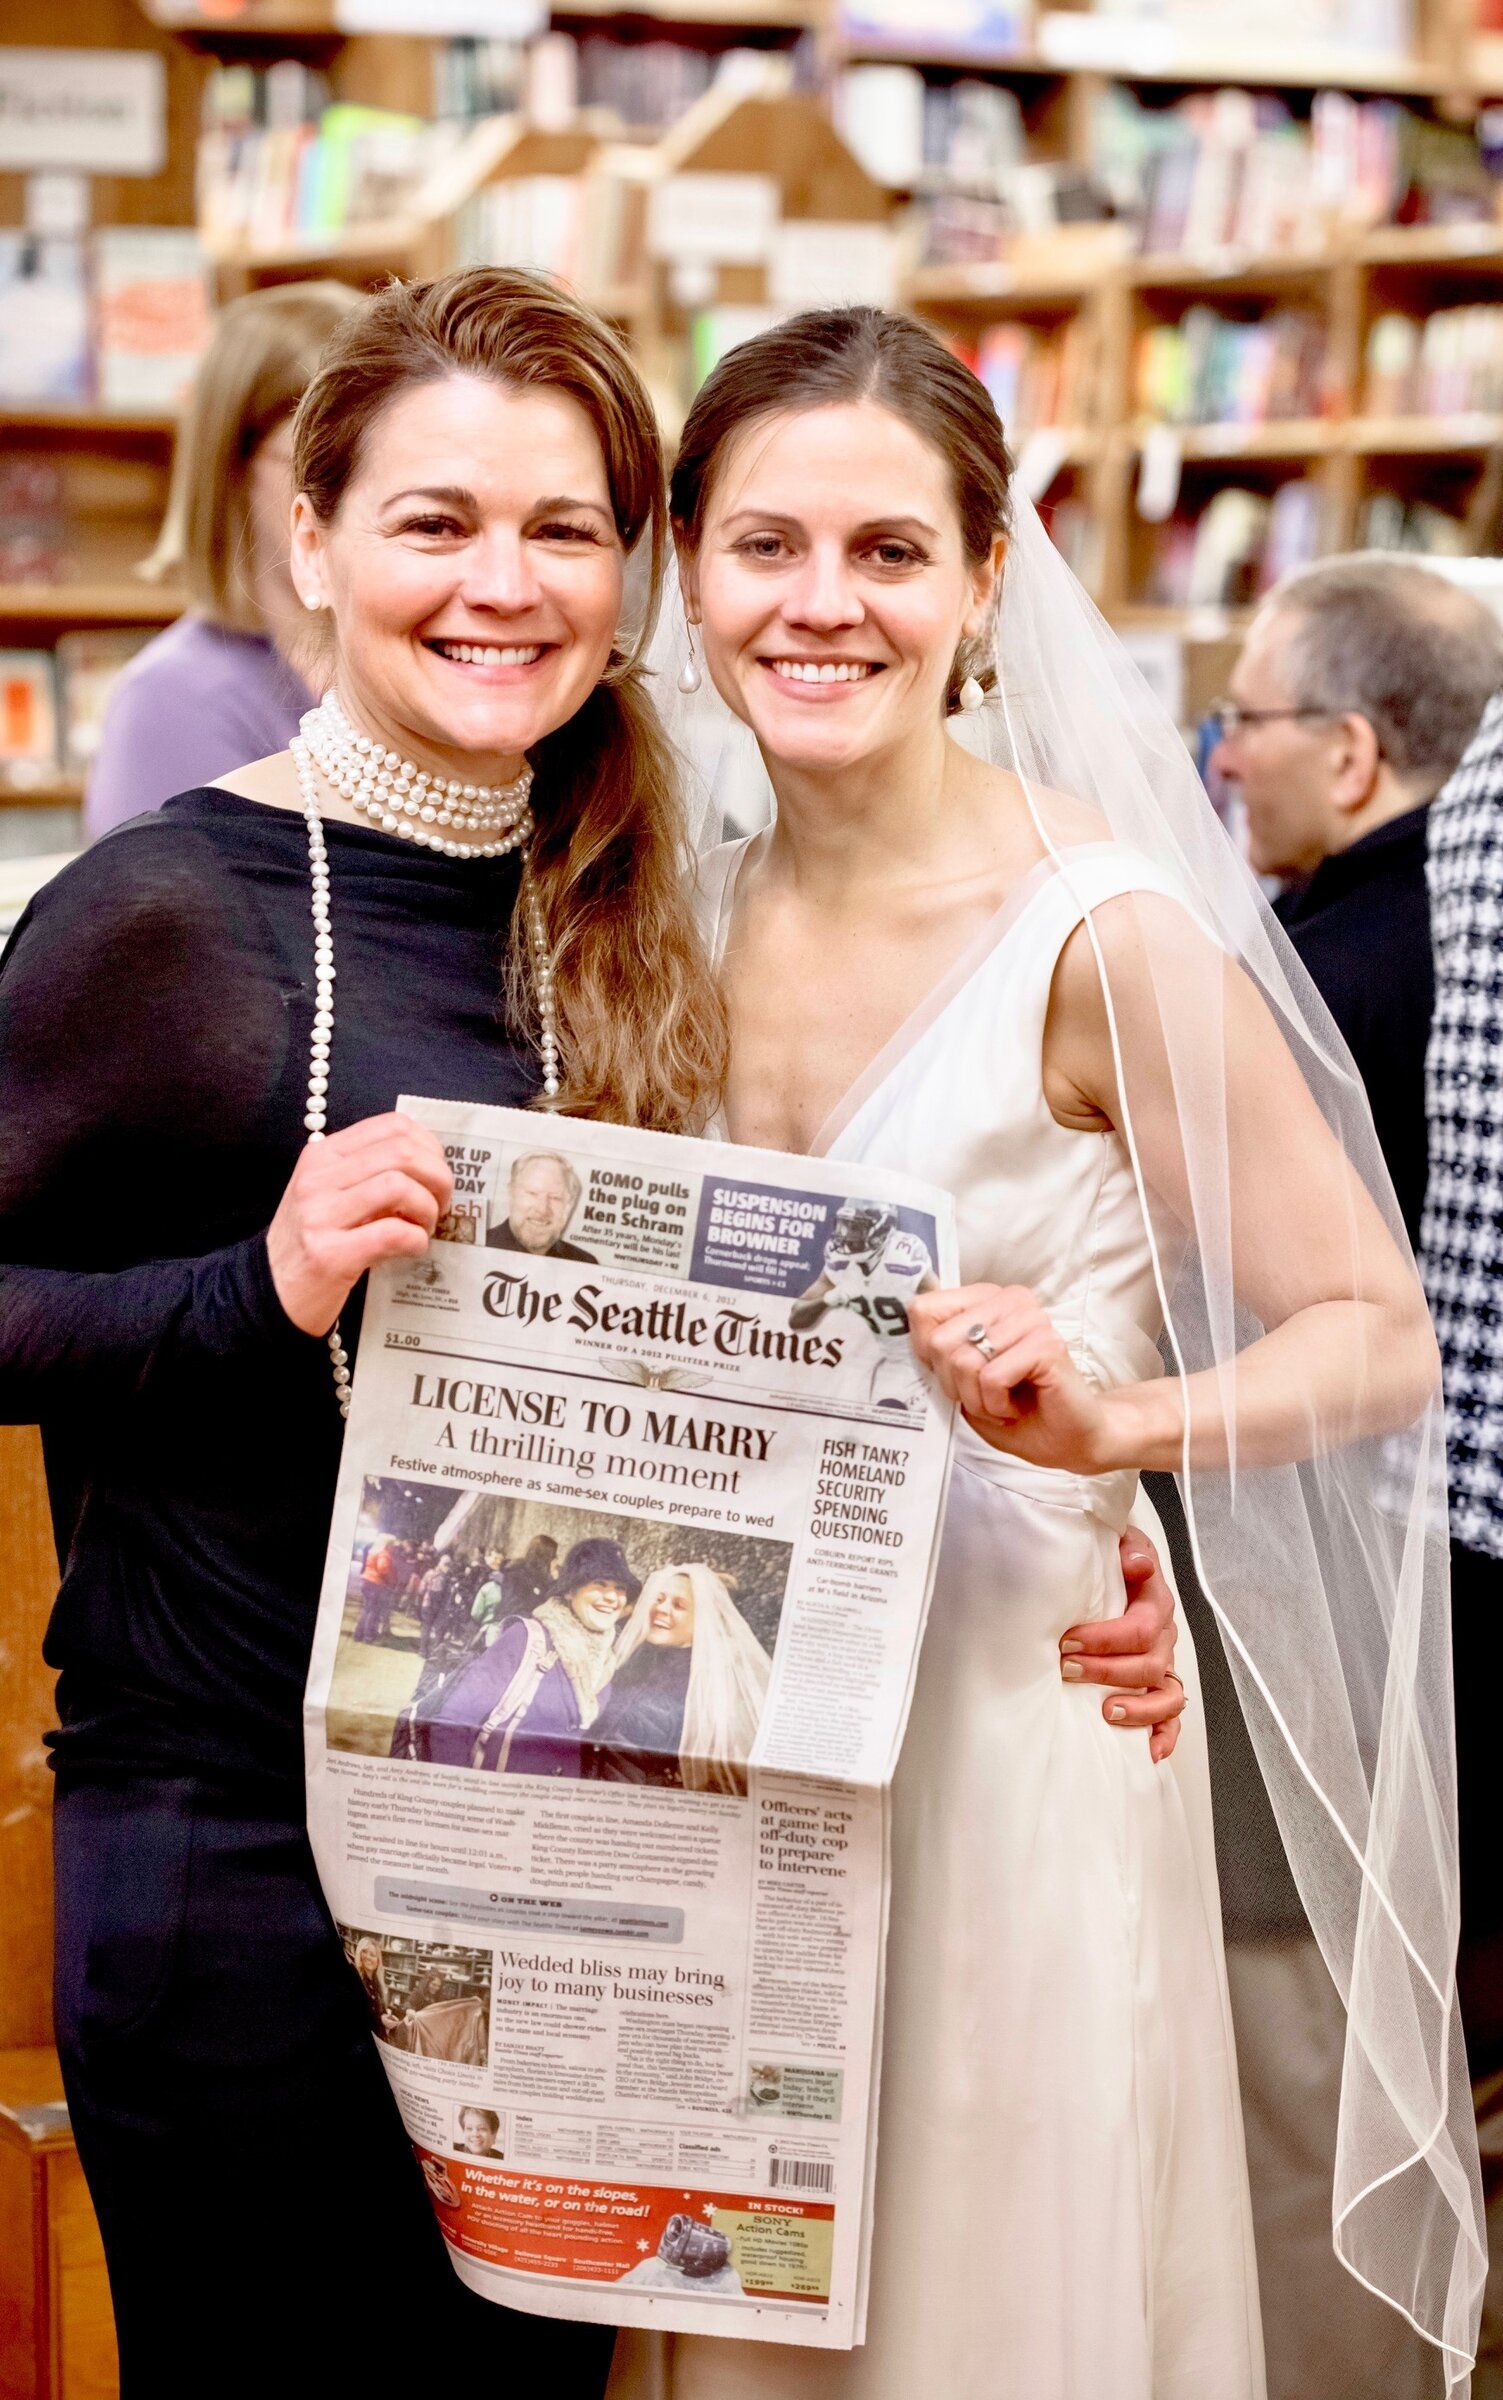 Happy anniversary! Its been 10 years since WA legalized same-sex marriage, including mine The Seattle Times